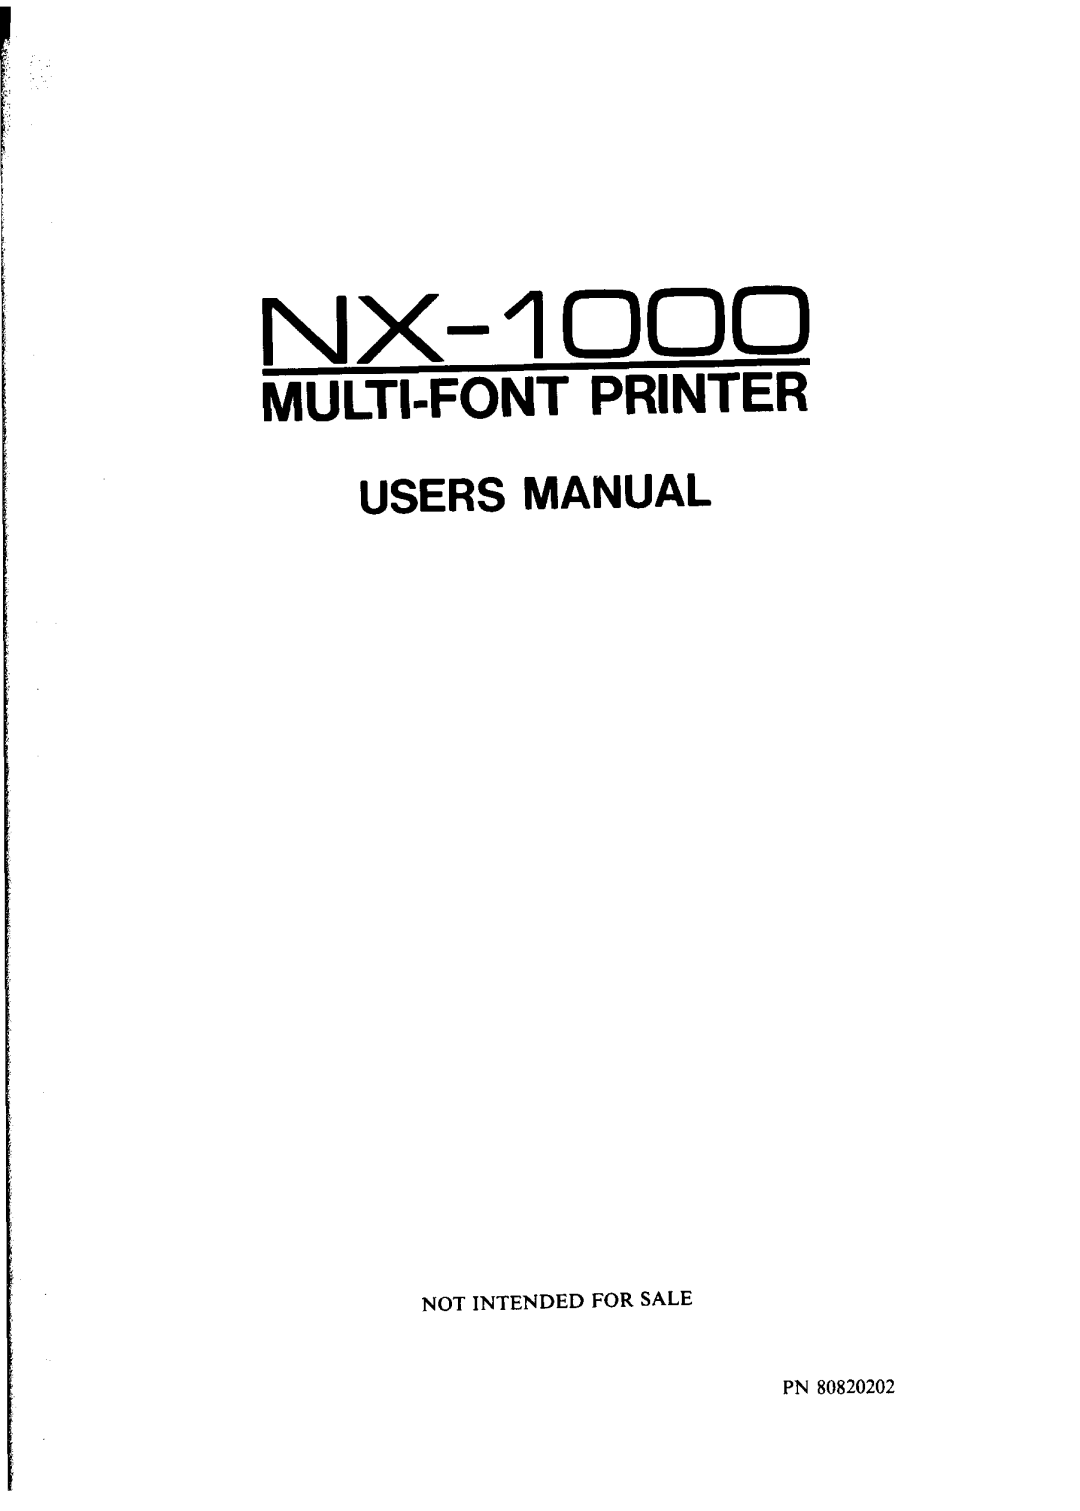 Star Micronics NX-1000 manual Not Intended For Sale 